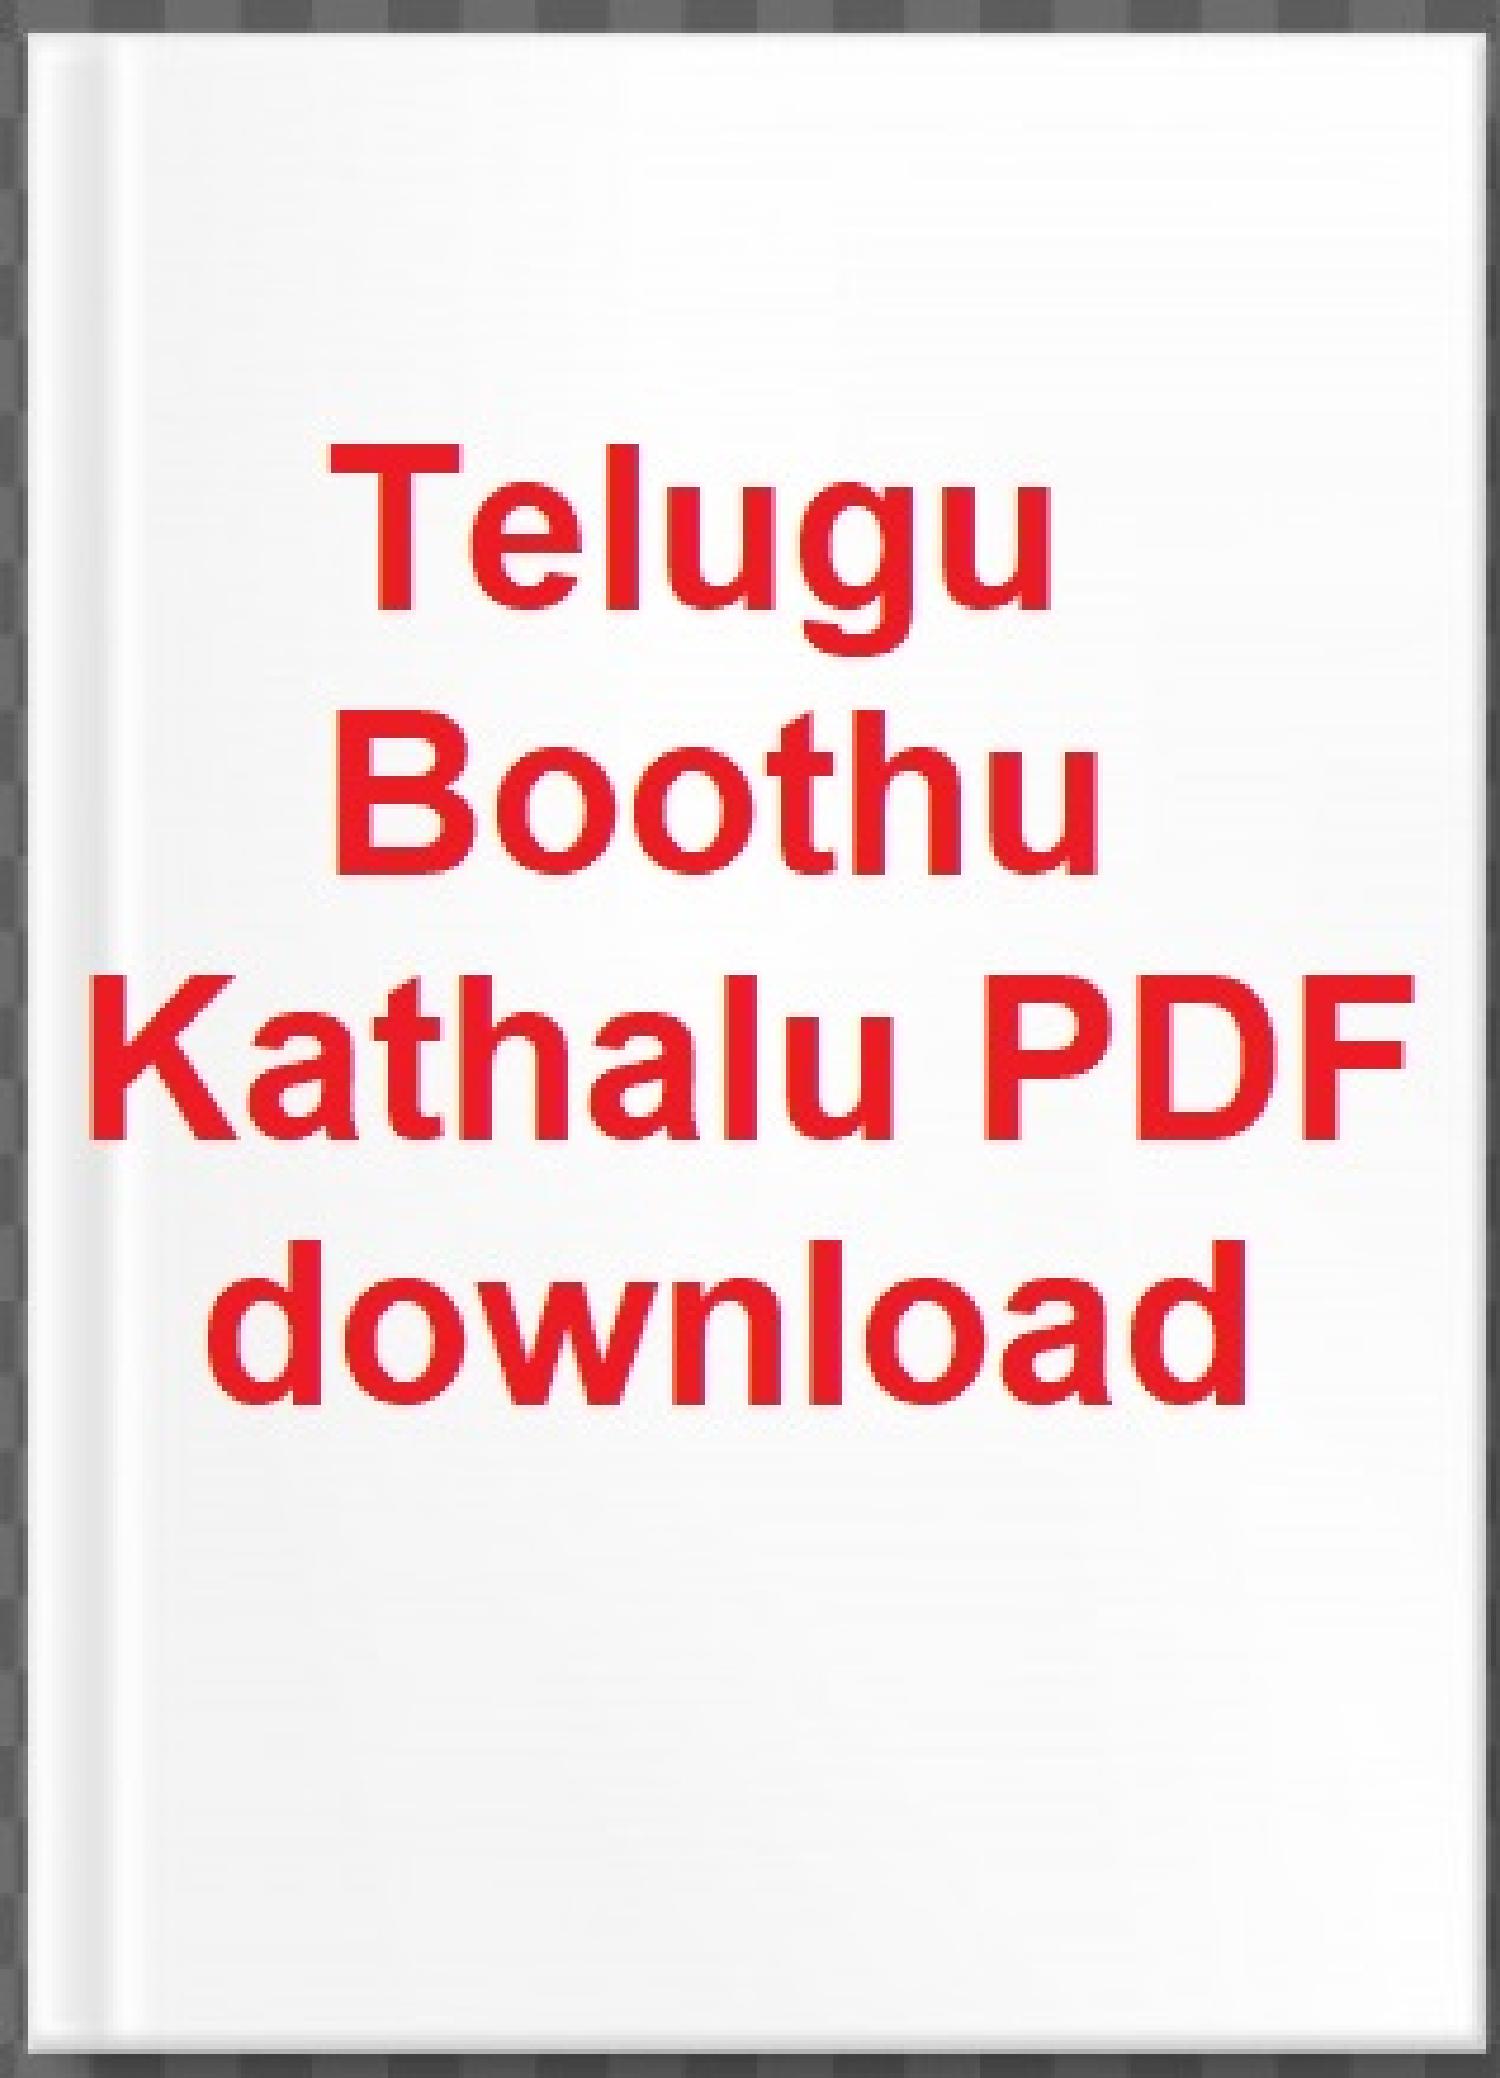 brian stolte recommends Telugu Boothu Kathalu New